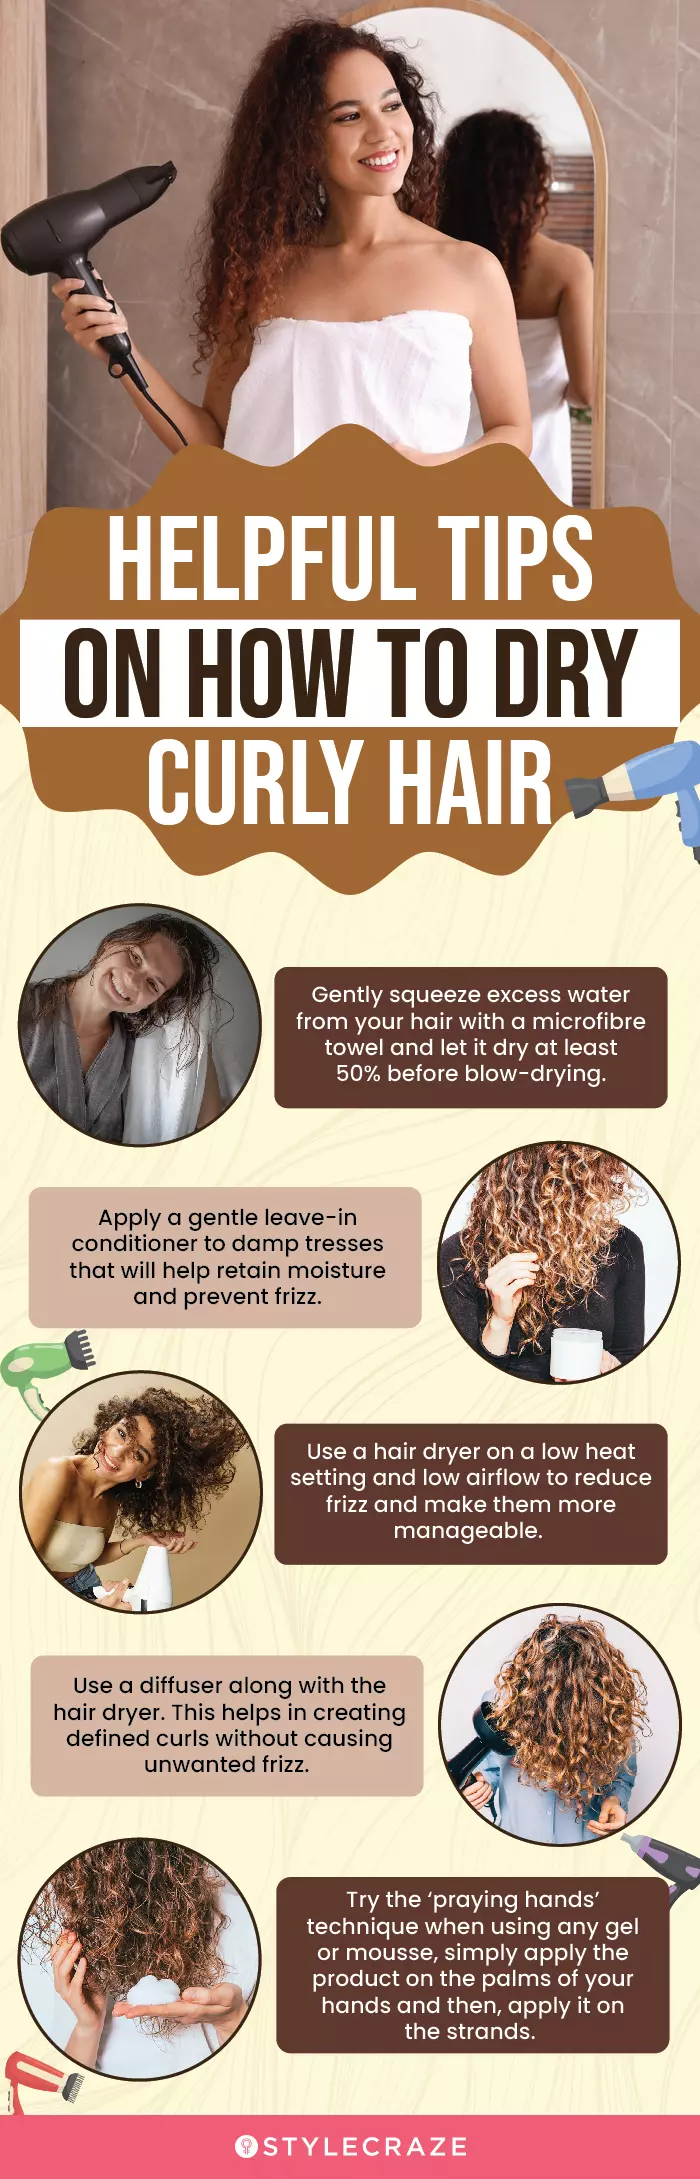 Helpful Tips On How To Dry Curly Hair (infographic)